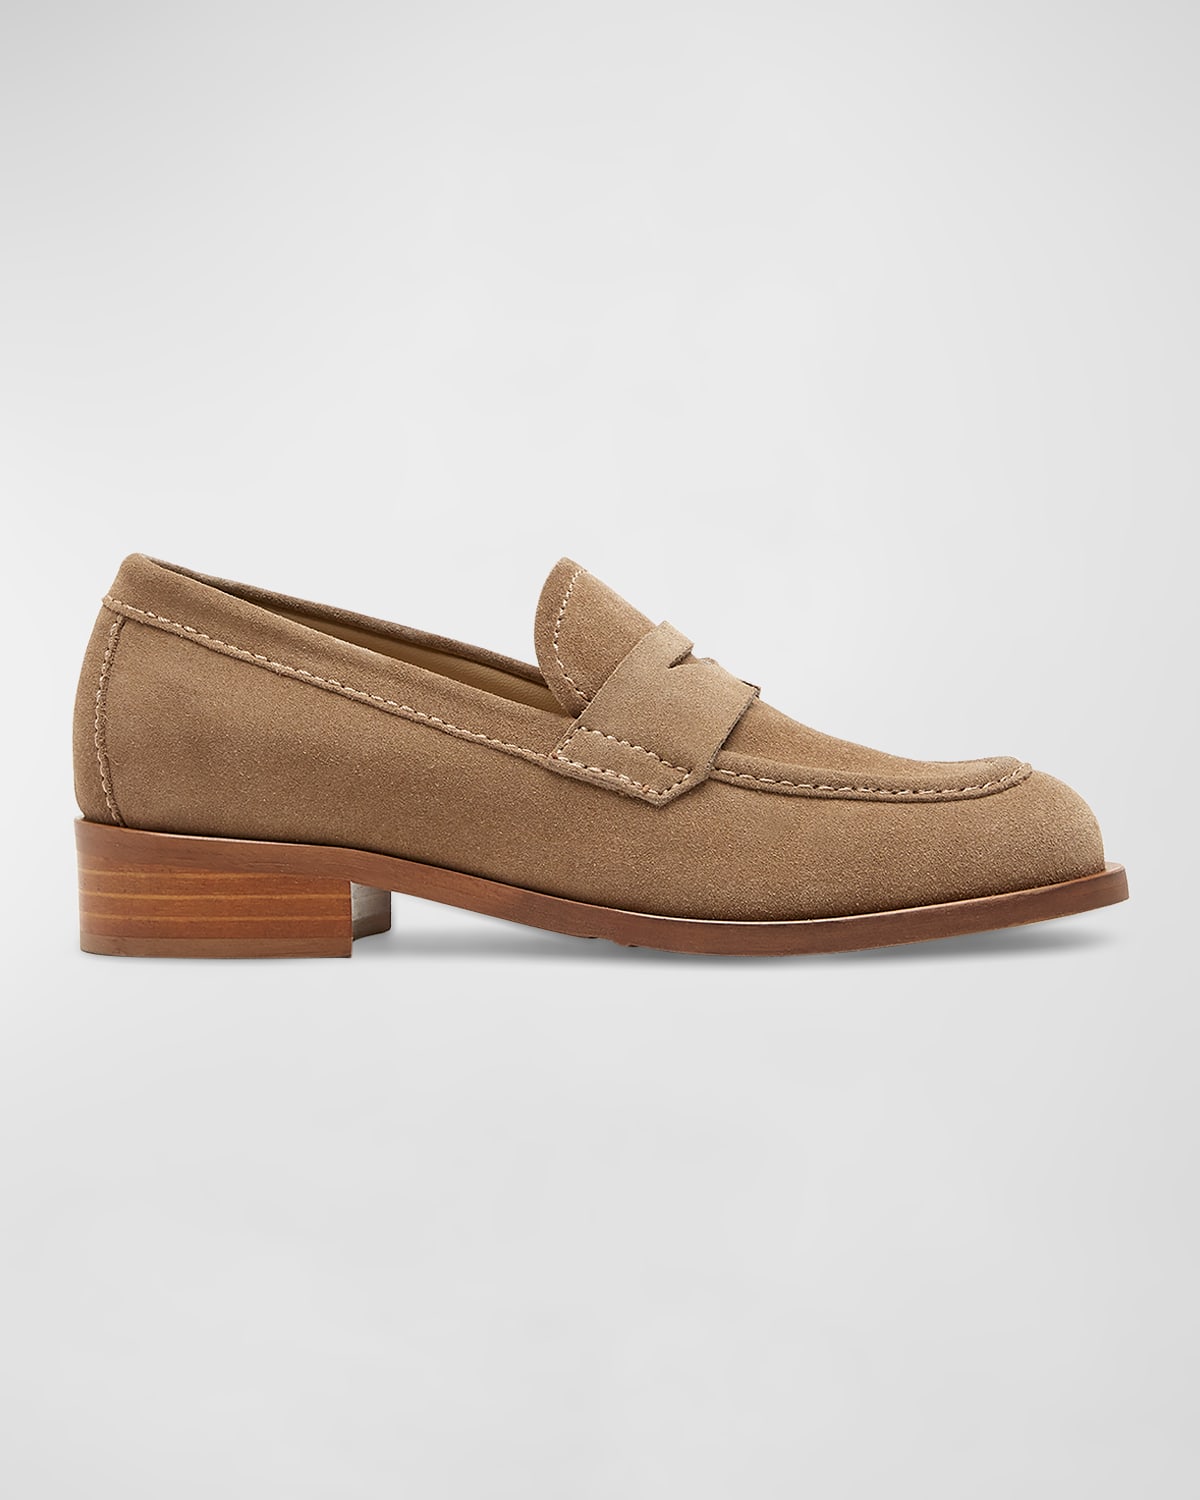 La Canadienne Dominic Suede Penny Loafers In Biscotti